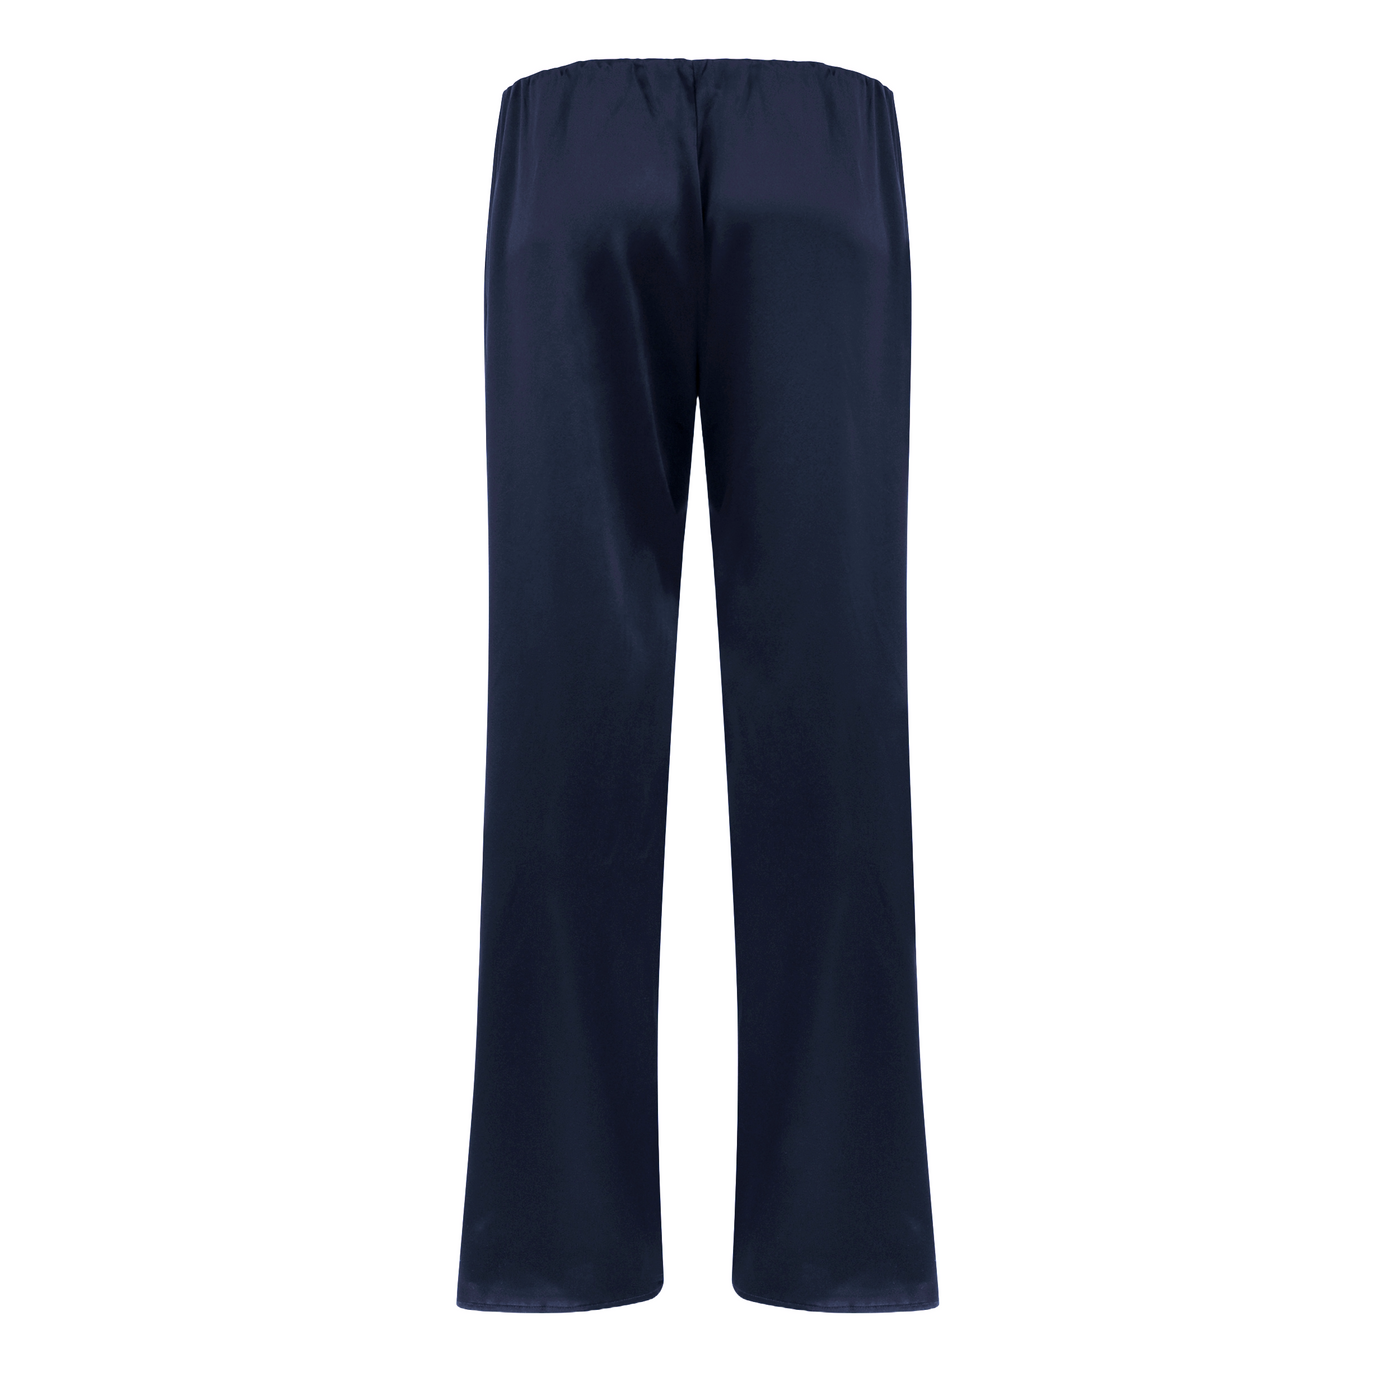 BACK OF ROMA SILK PANTS IN NAVY